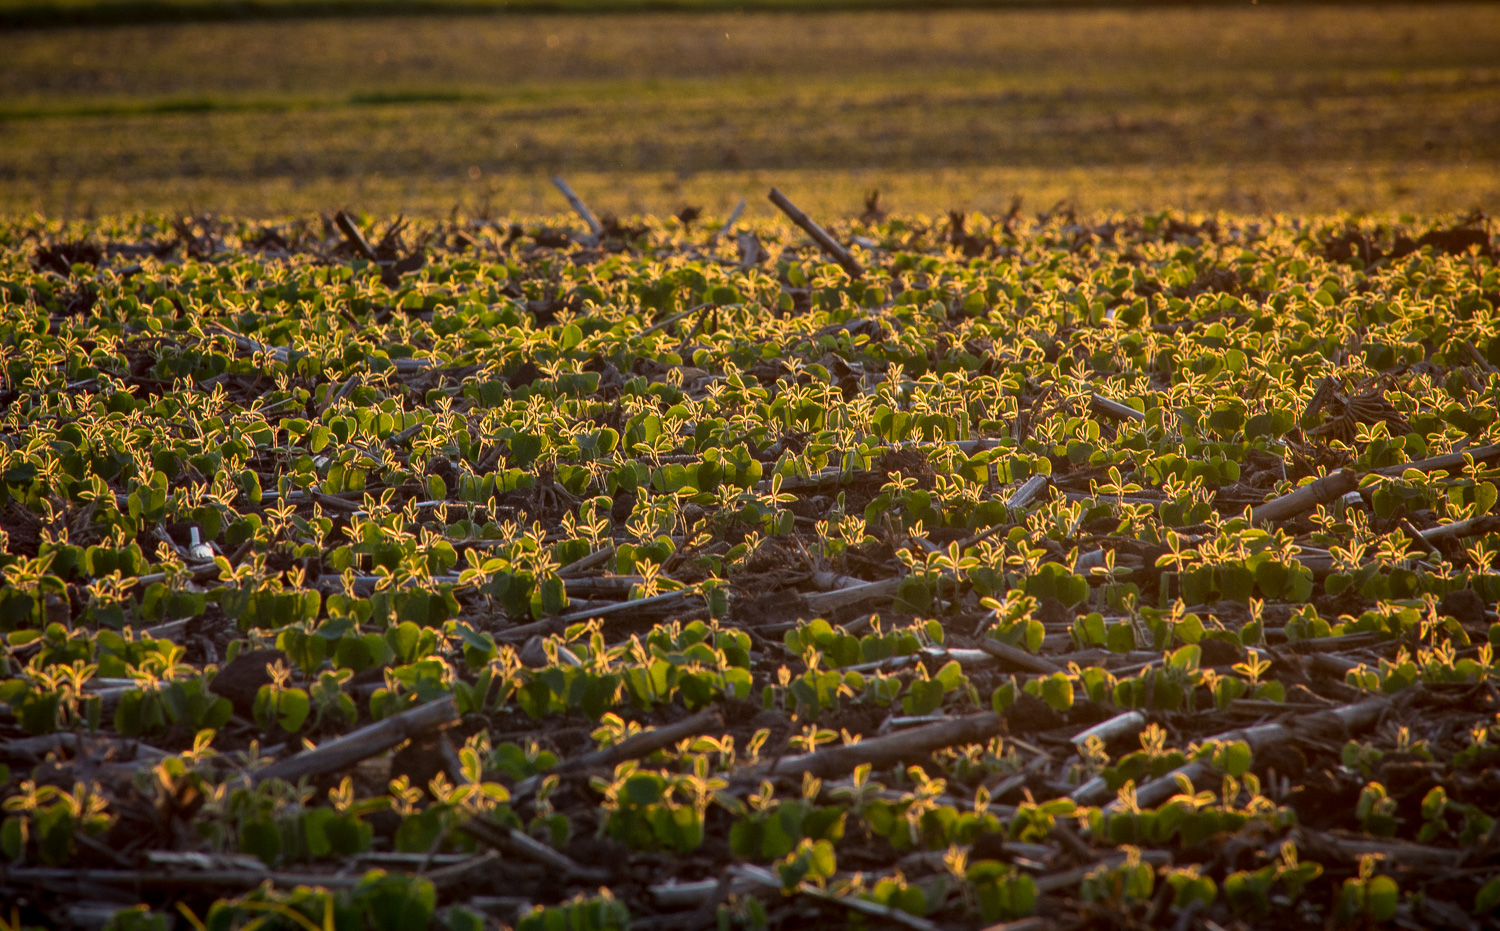 Soybean field at sunset